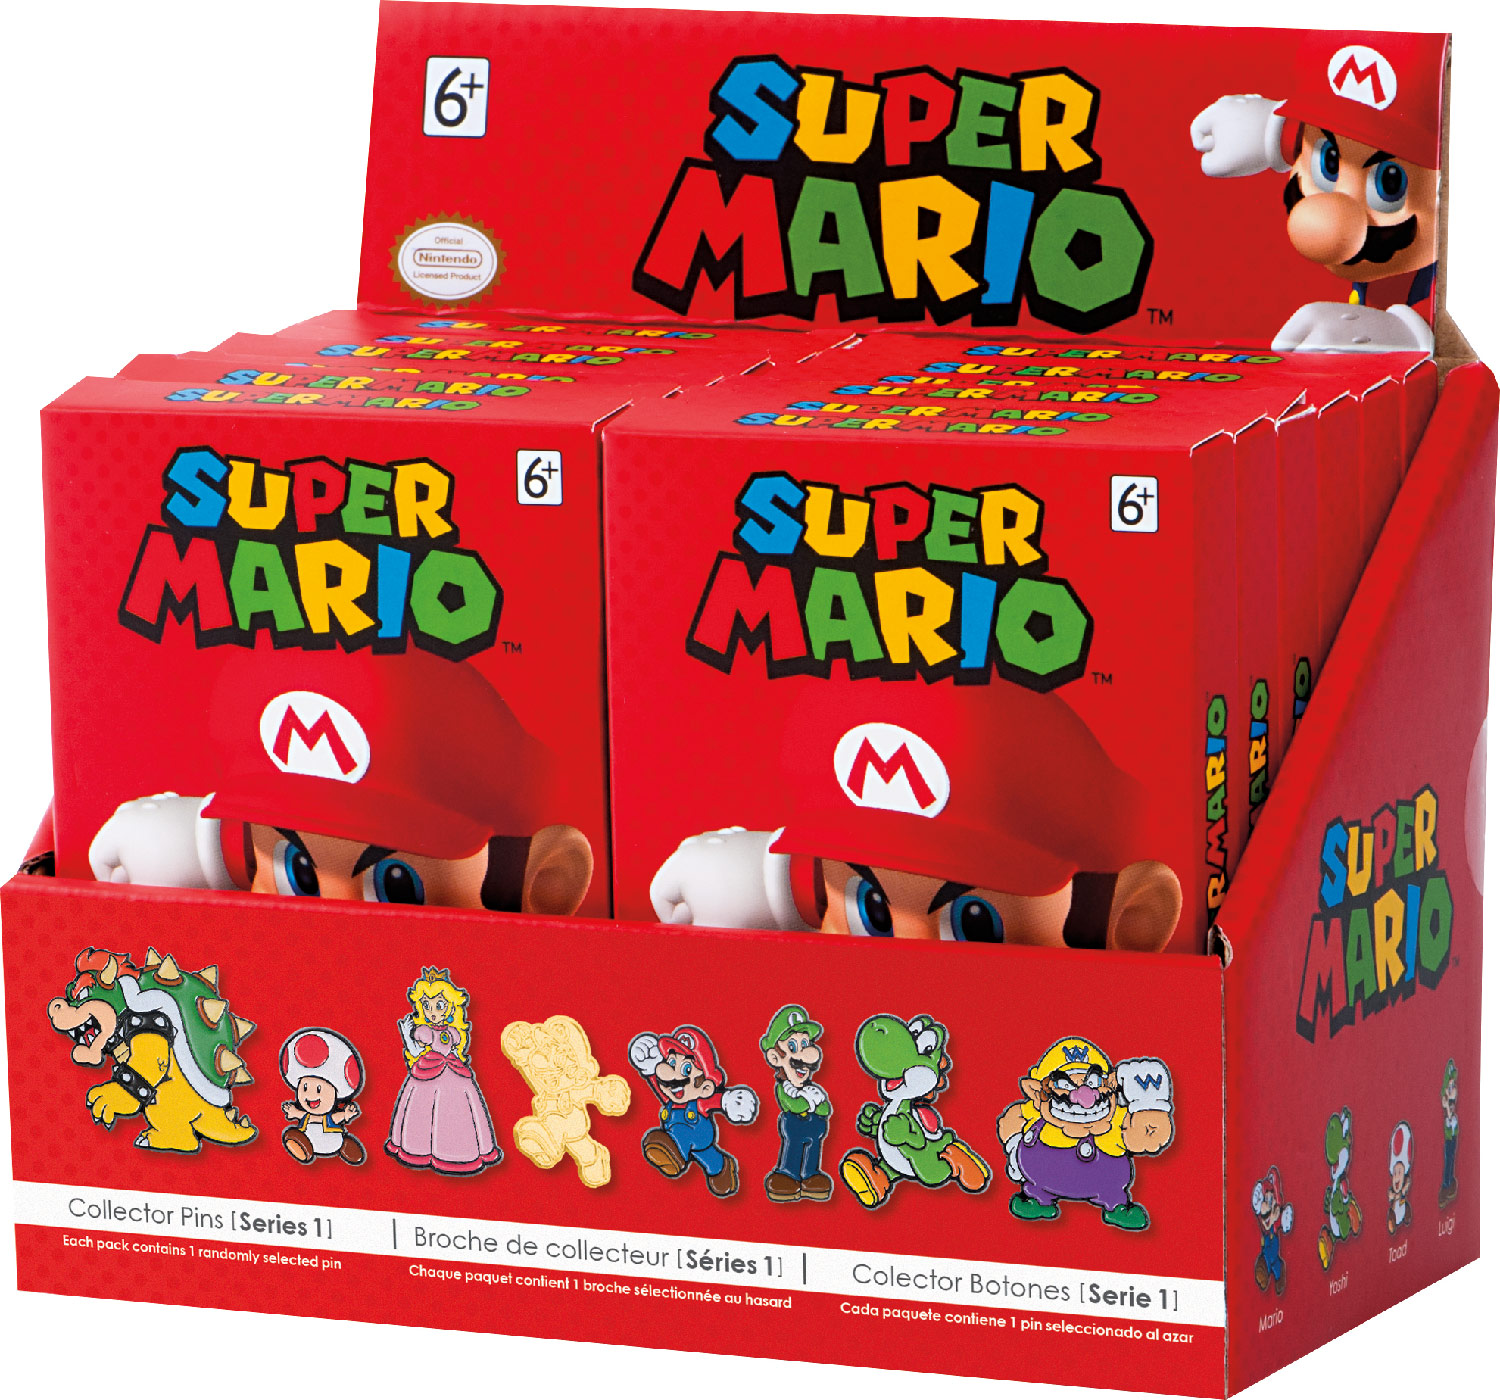 Super Mario Collector Pins Coming To Stores In December Vooks 1284